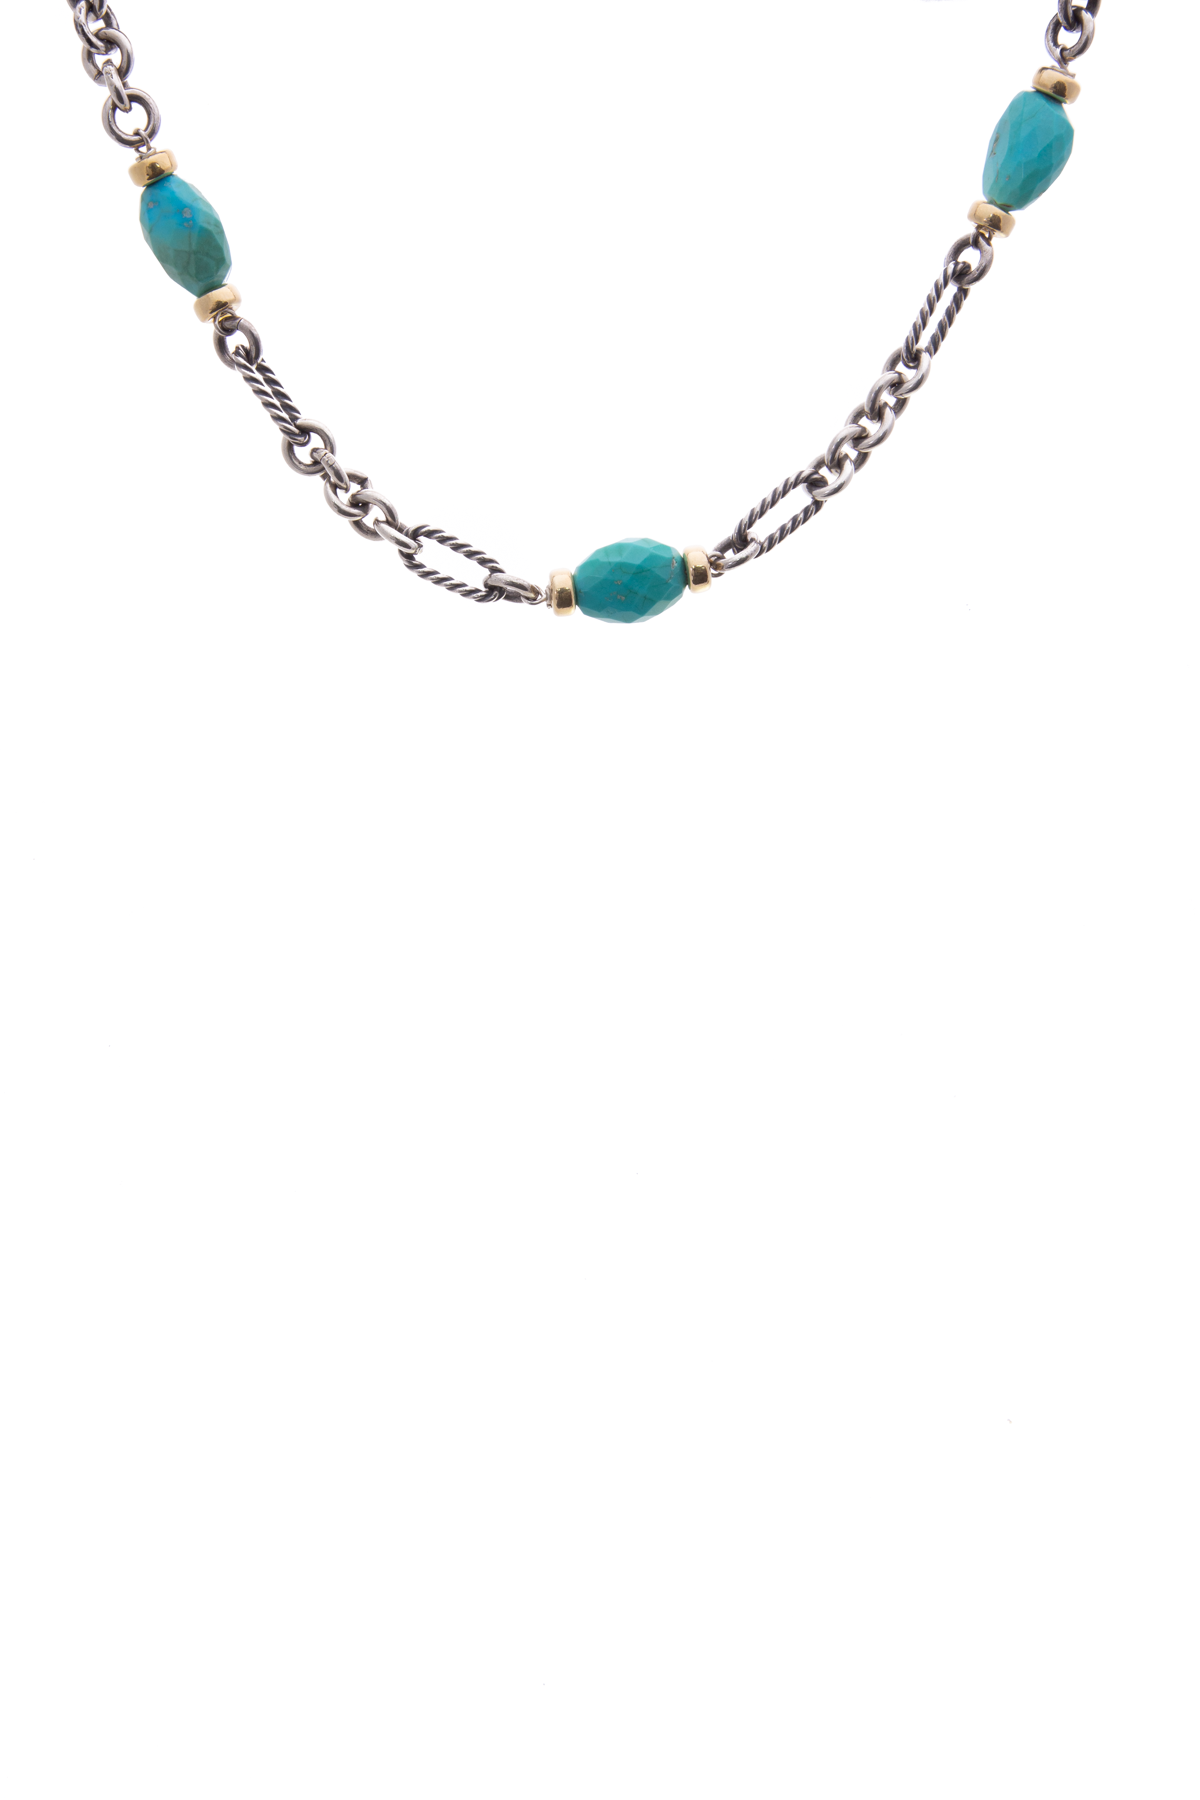 Turquoise Bead Station Necklace 18K Gold 30 Inch Length - Ruby Lane